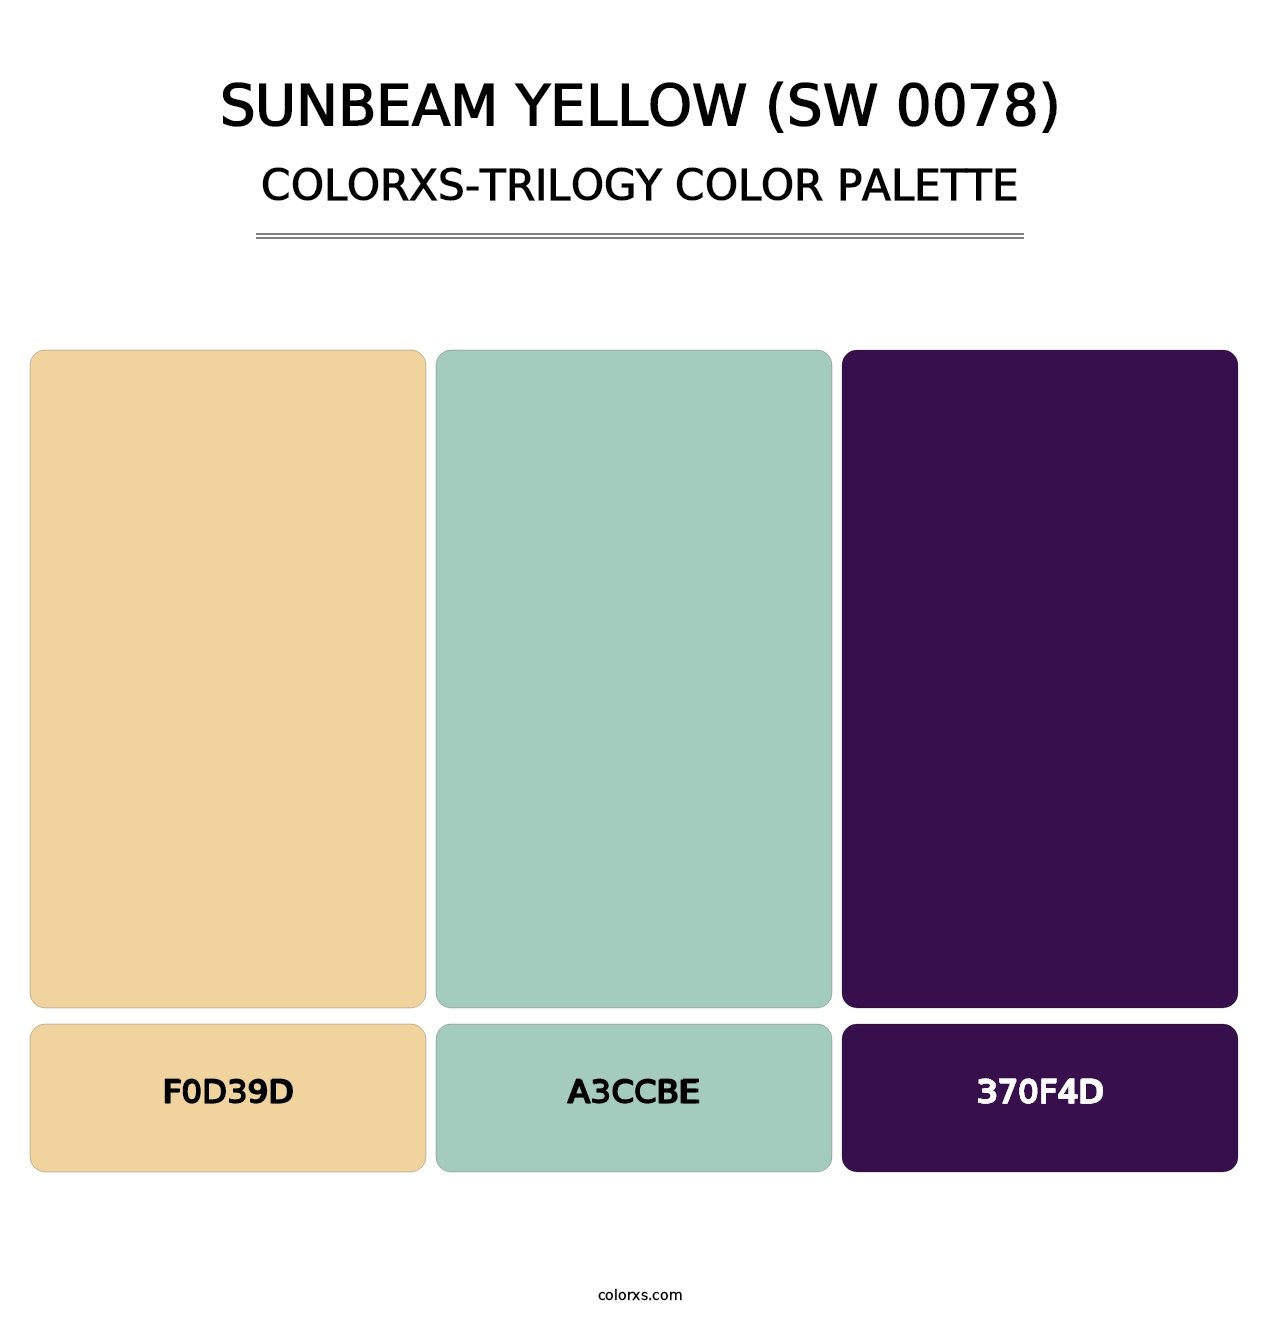 Sunbeam Yellow (SW 0078) - Colorxs Trilogy Palette